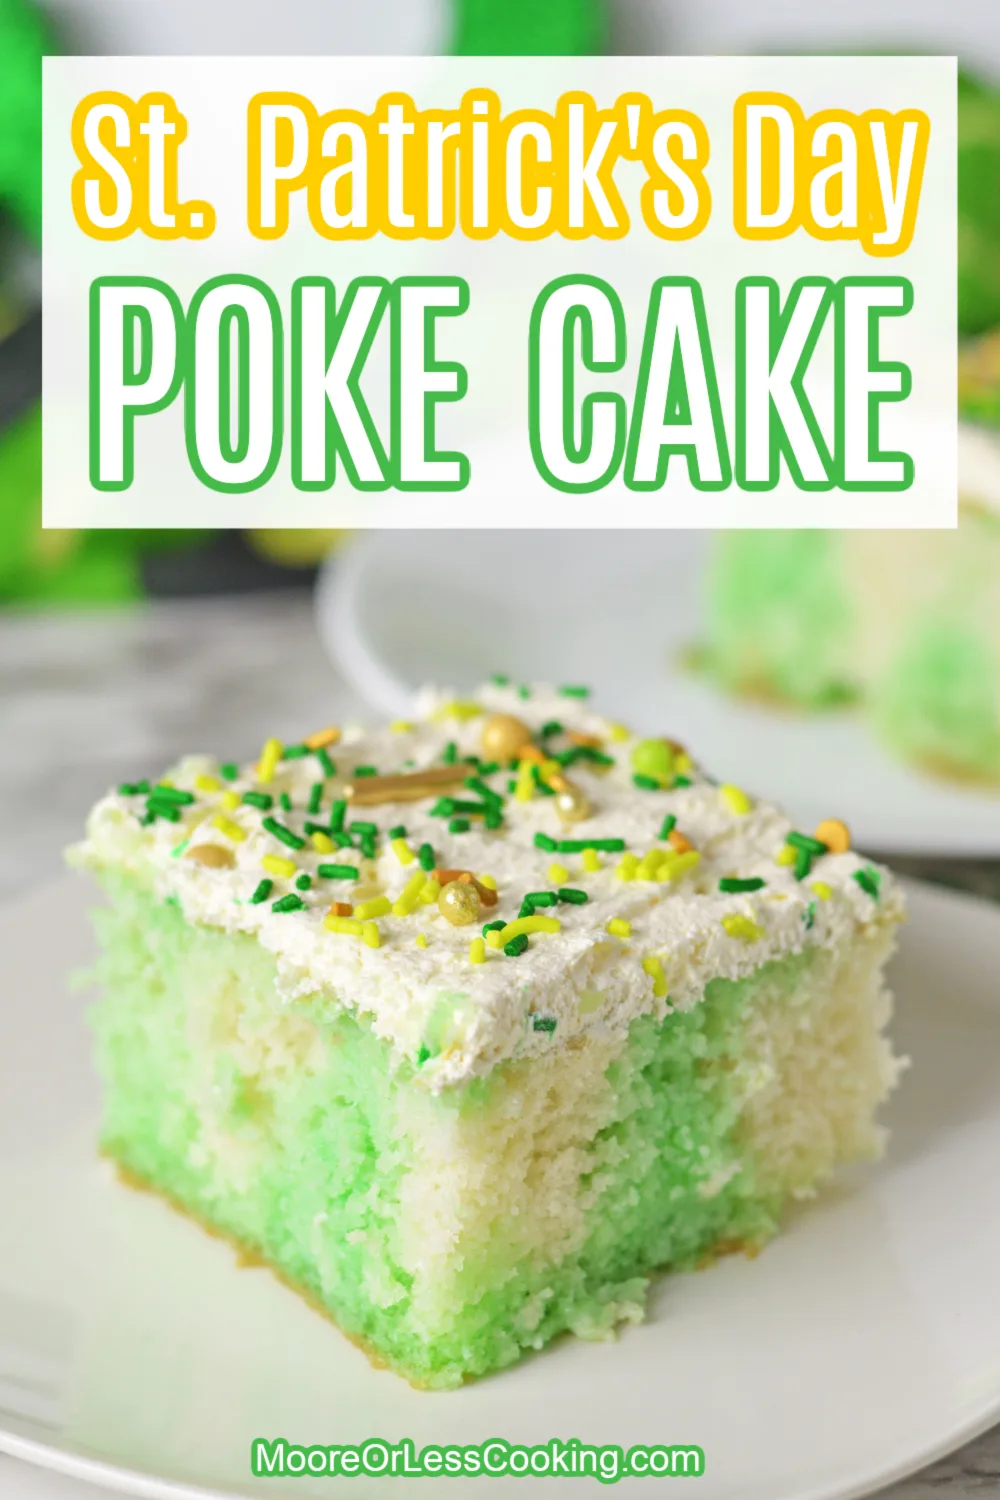 Up-level a boxed cake mix with lime jello in this outrageously delicious St. Patrick's Day Poke Cake. Go all out for this Irish holiday by garnishing the white chocolate pudding and cool whip frosting with green and gold sprinkles for a festive touch. via @Mooreorlesscook